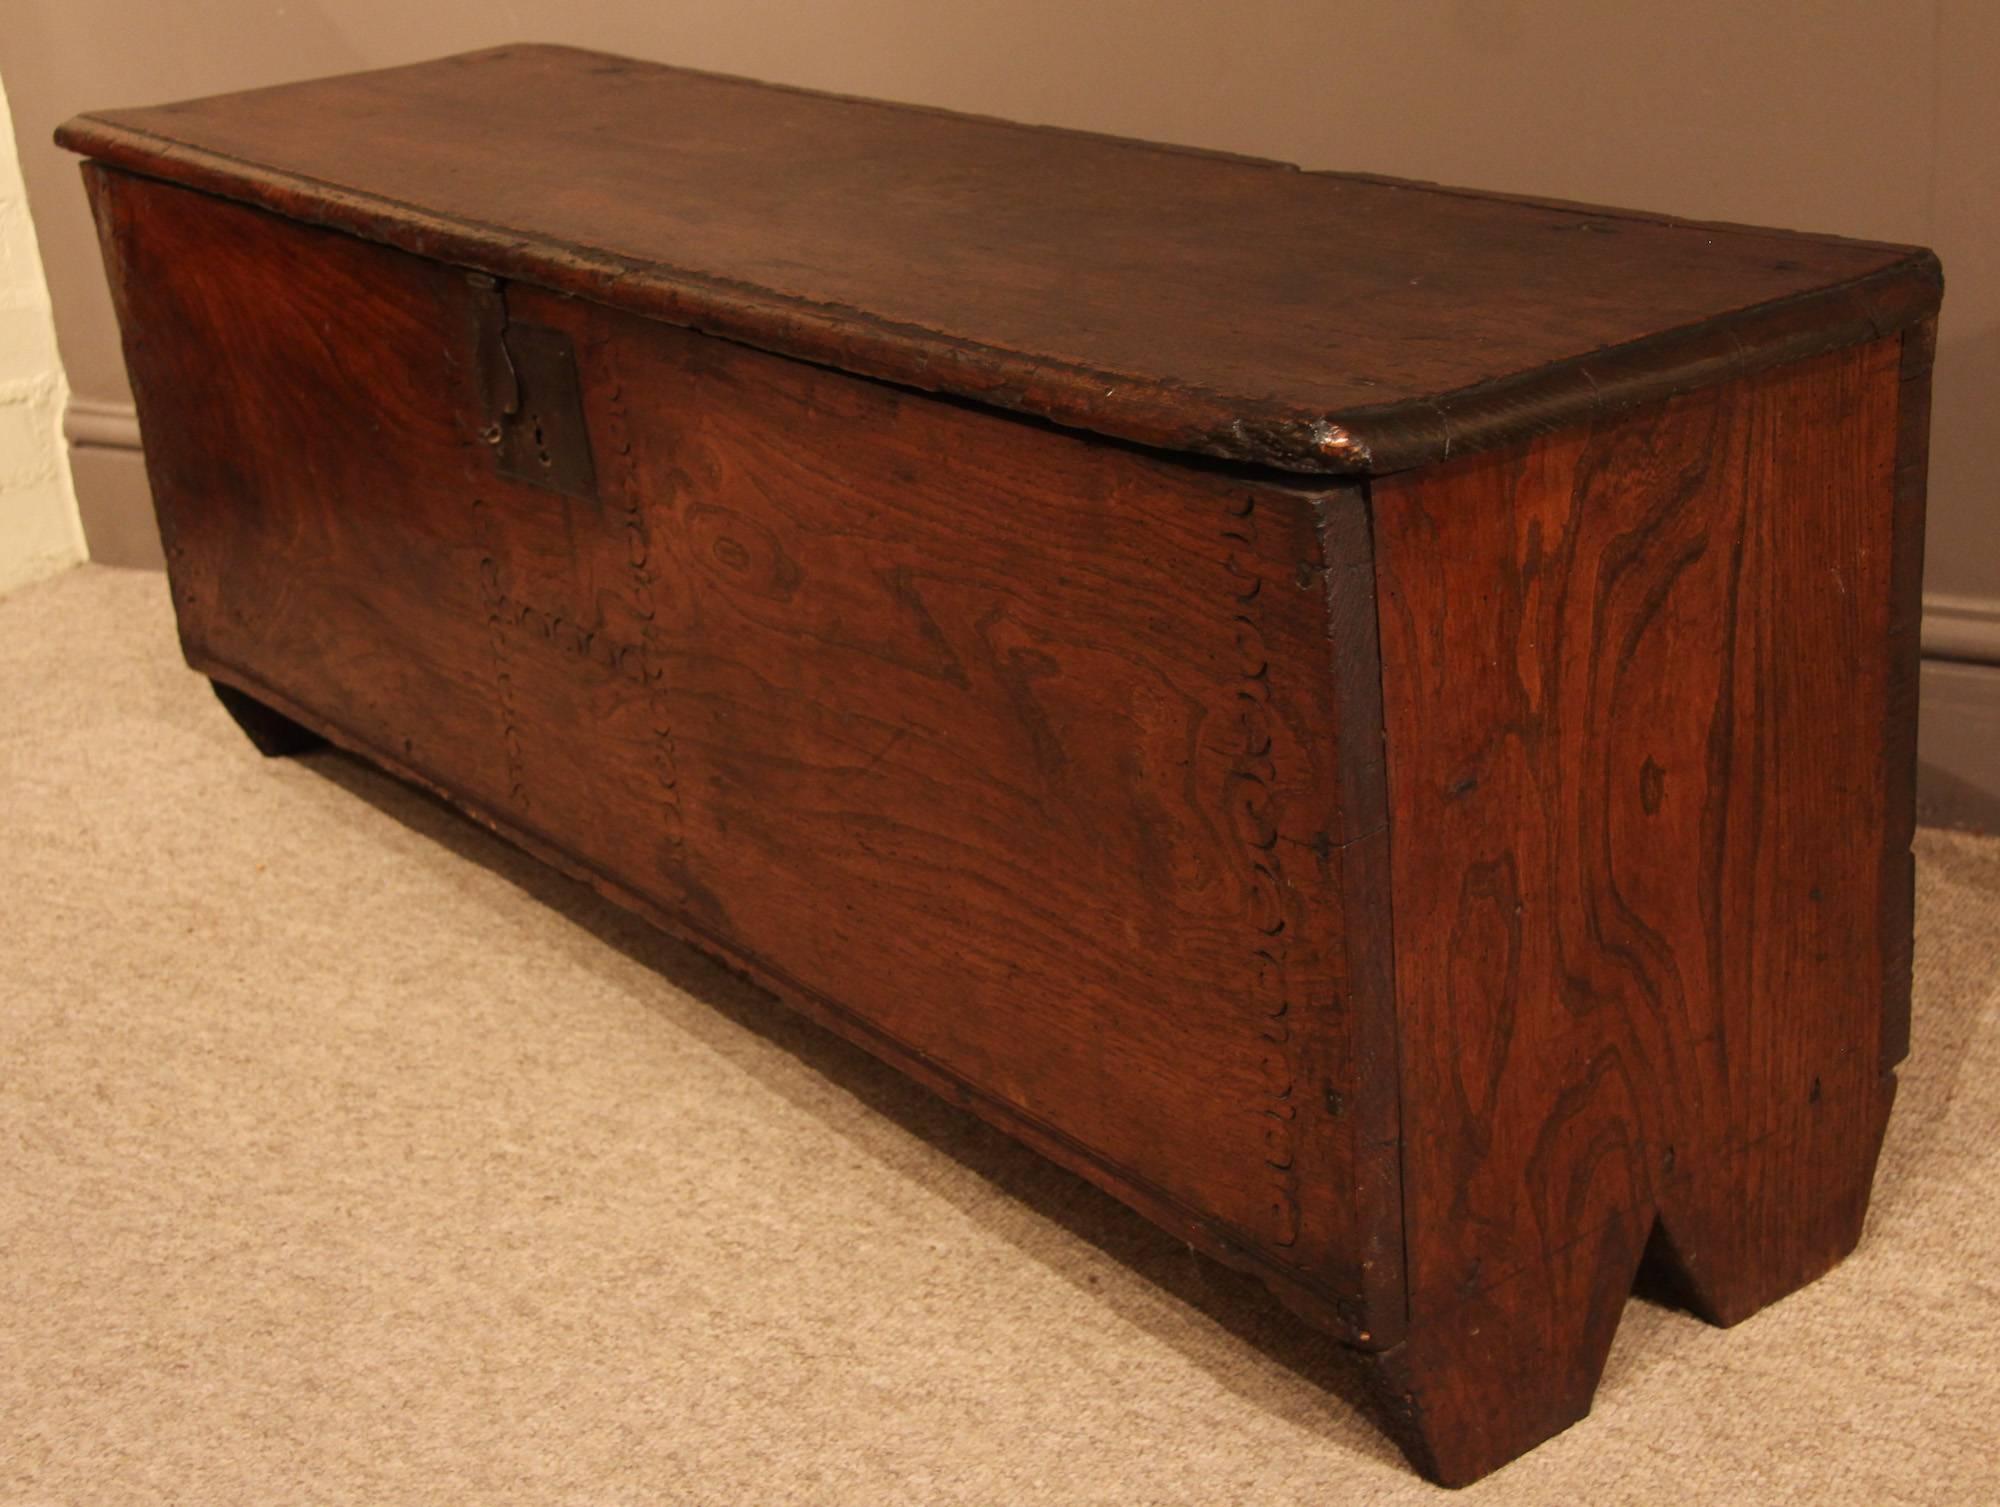 An early 18th century six-plank elm coffer, circa 1720.

All of the items that we advertise for sale have been as accurately described as possible and are in excellent condition, unless otherwise stated. Please note that we are also able to